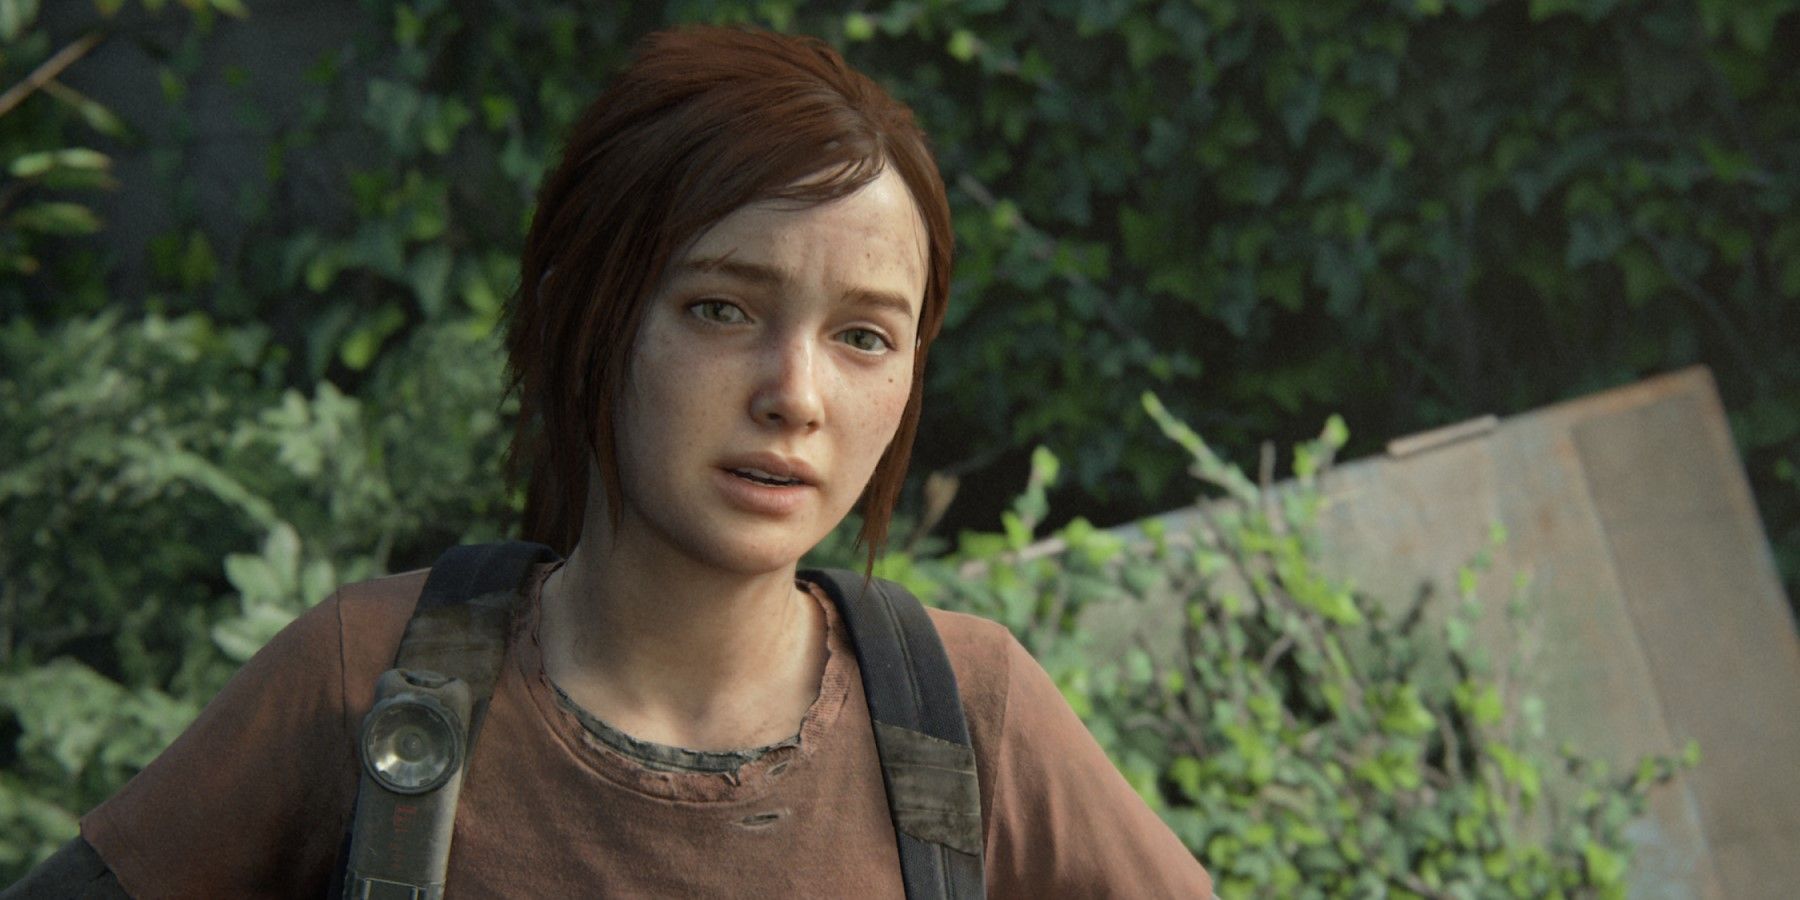 The Last of Us 3 Should Bring Ellie's Story to a Close